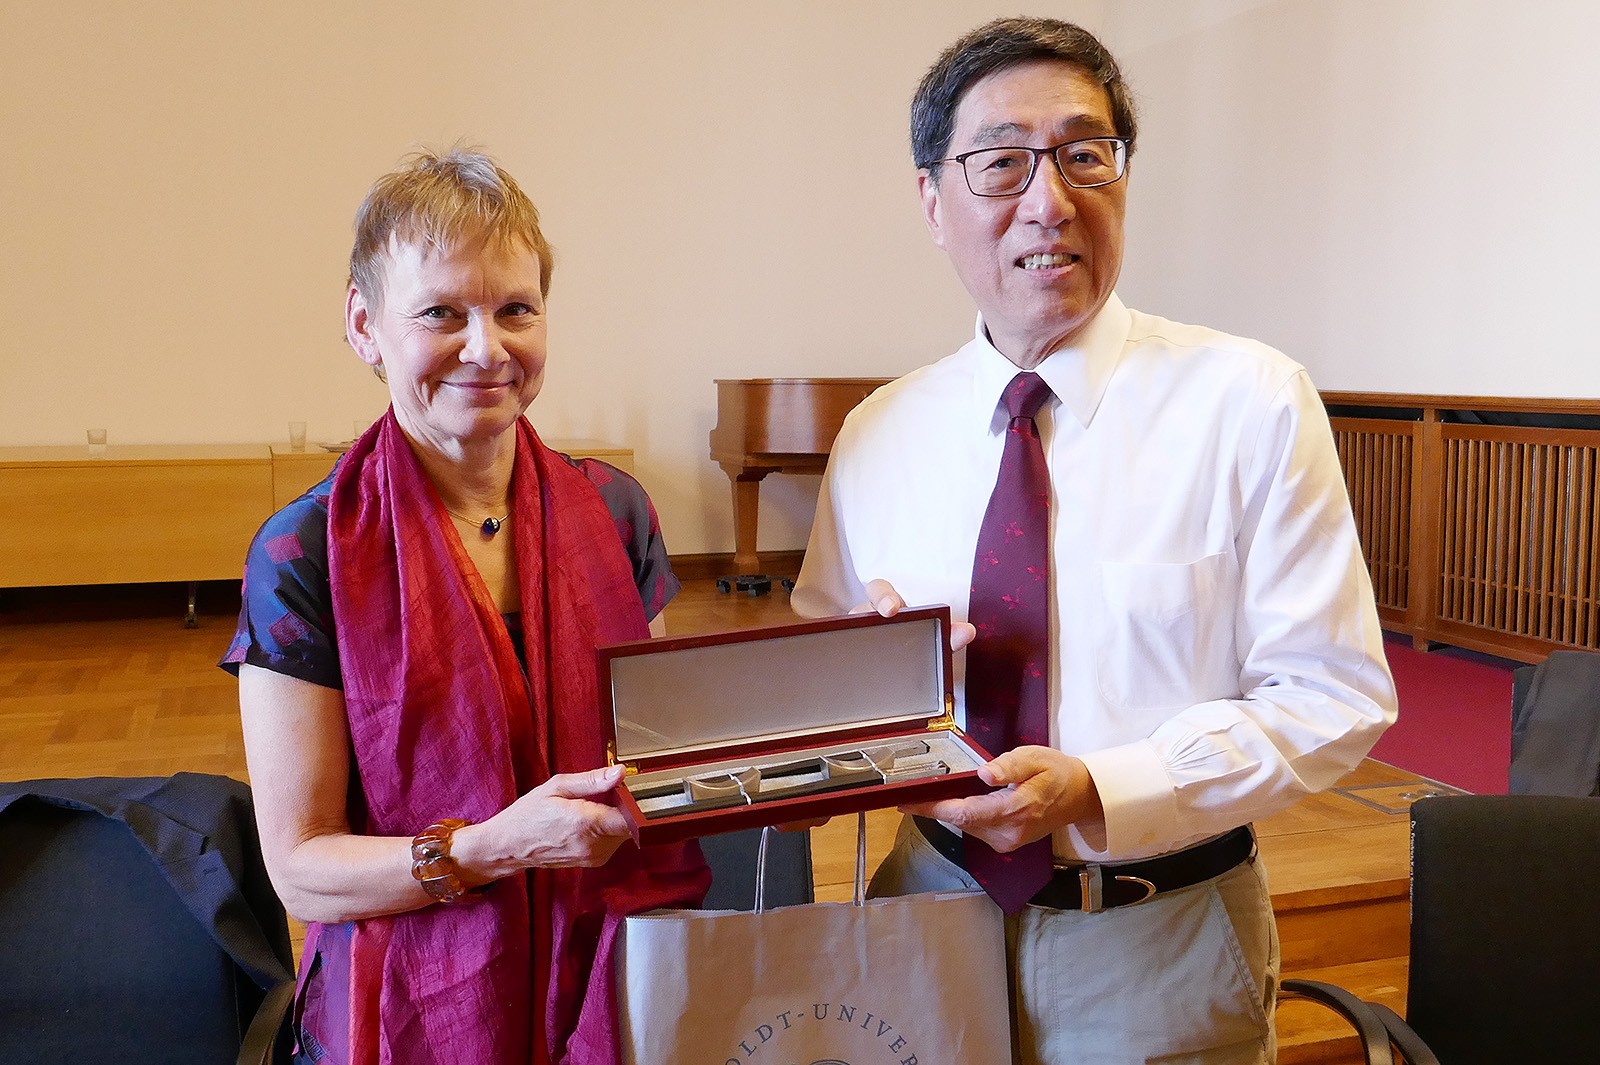 President Kuo (right) and Professor Kunst exchange souvenirs at HU Berlin.